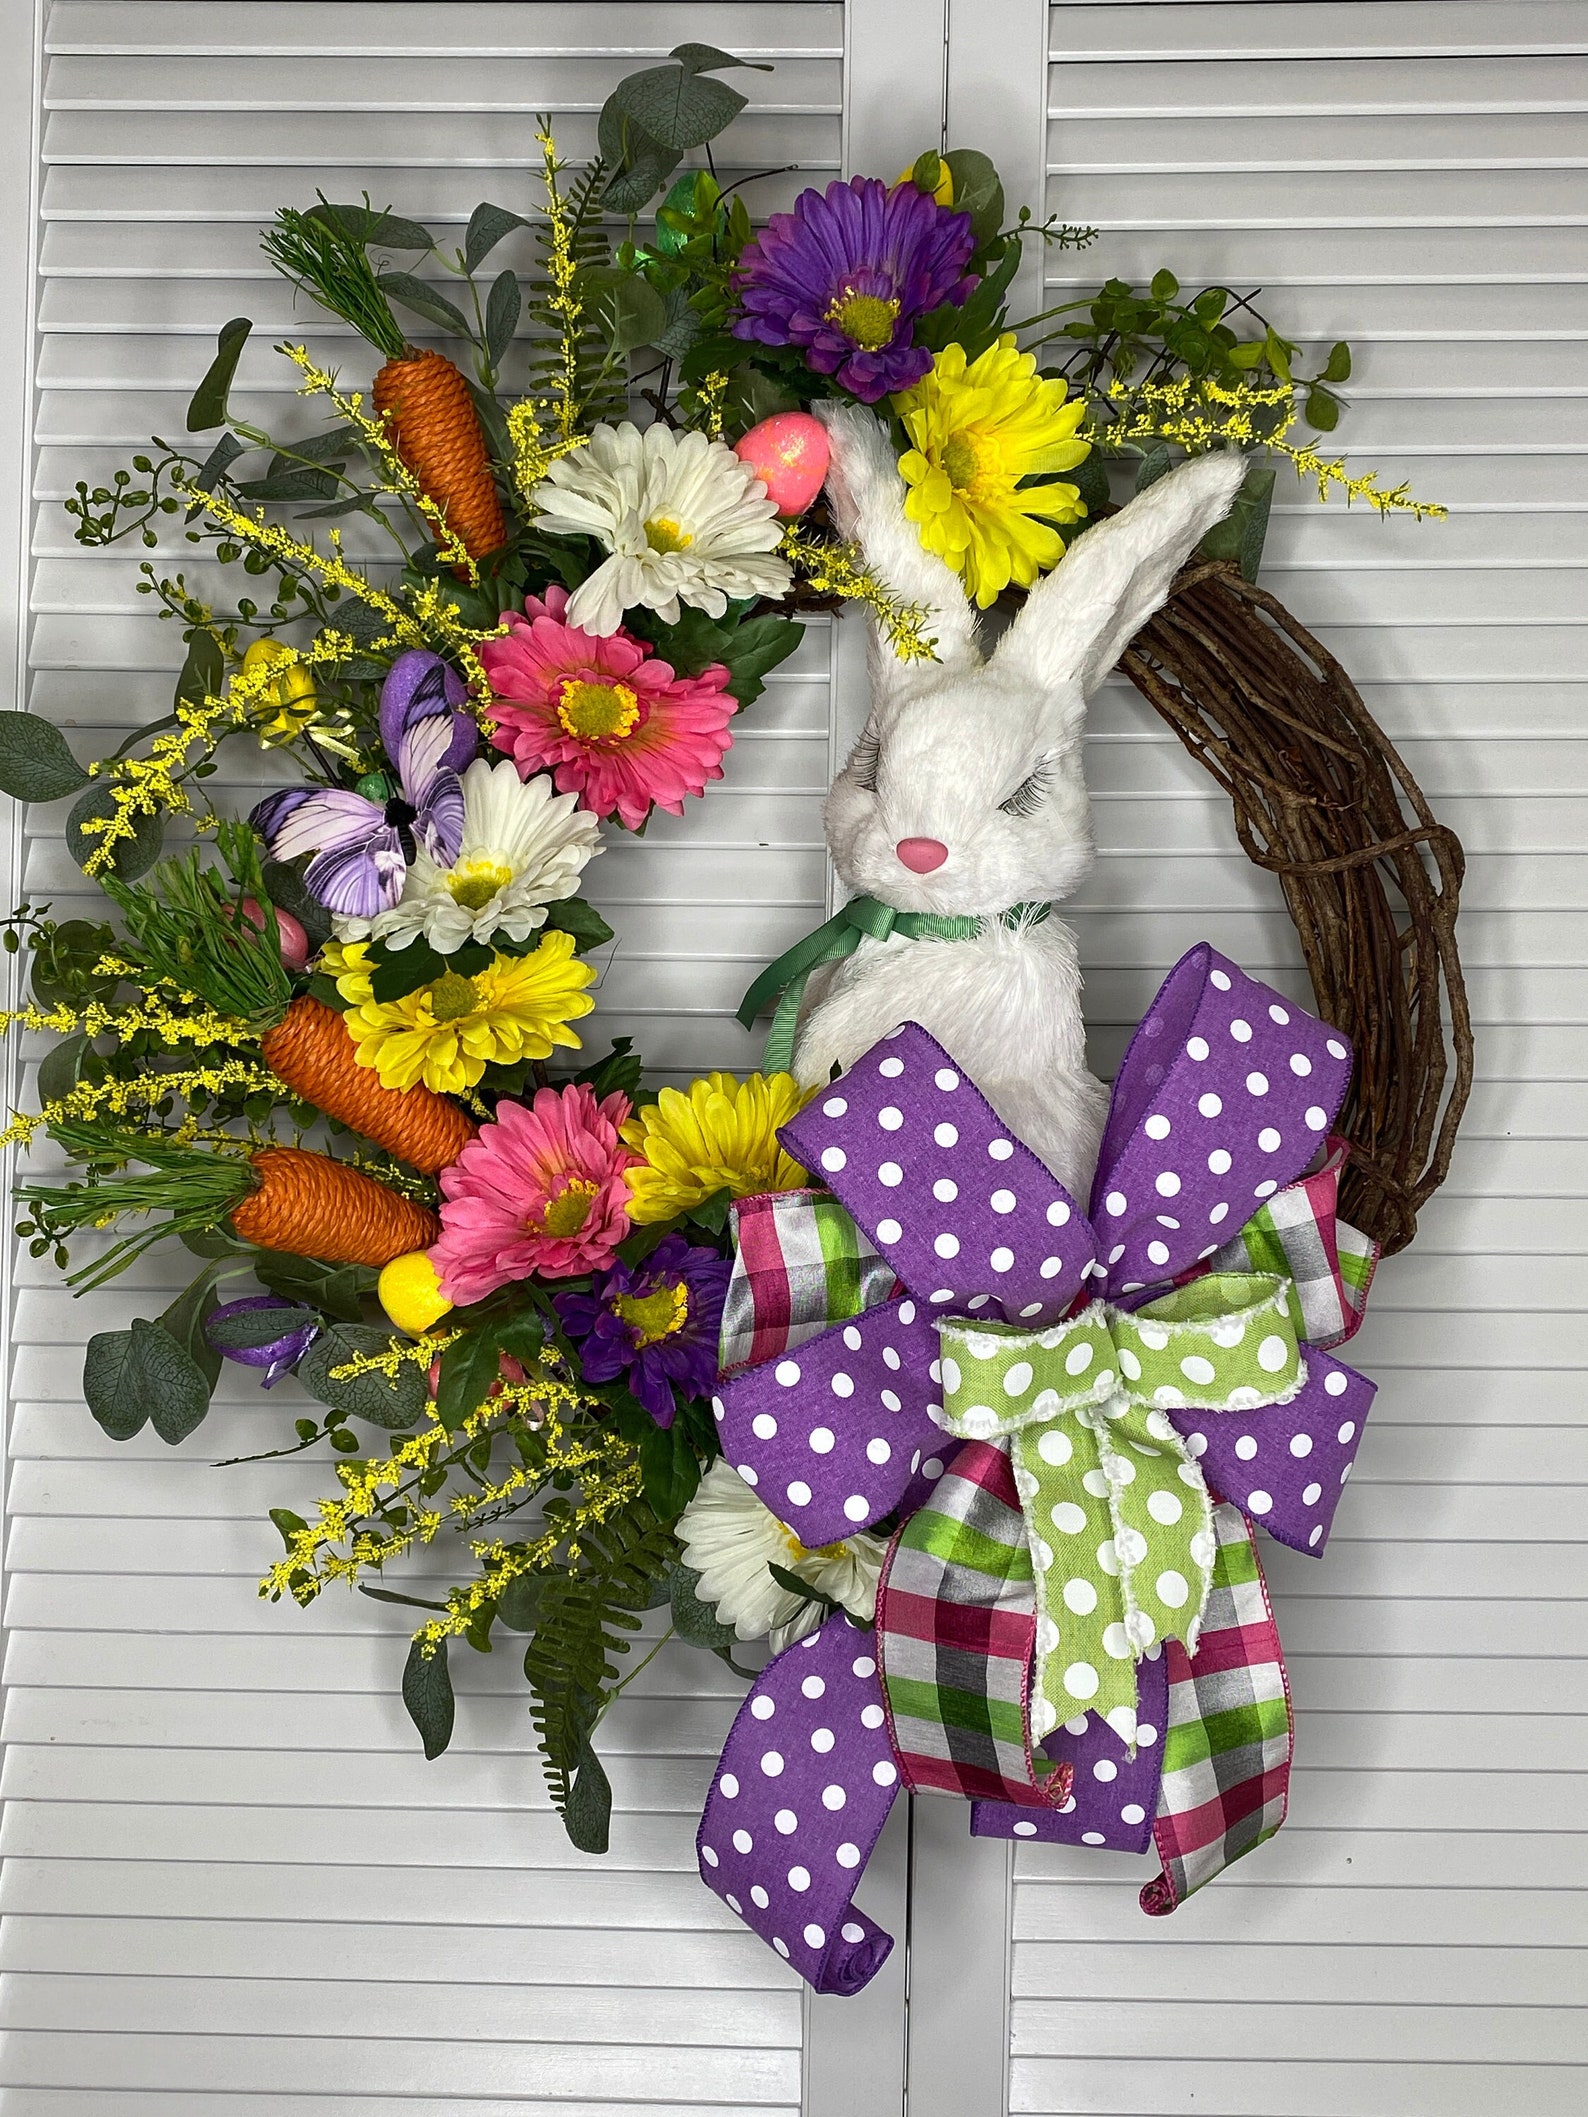 Partially Covered Grapevine Wreaths with Flowers, Greenery, Eggs and Carrots